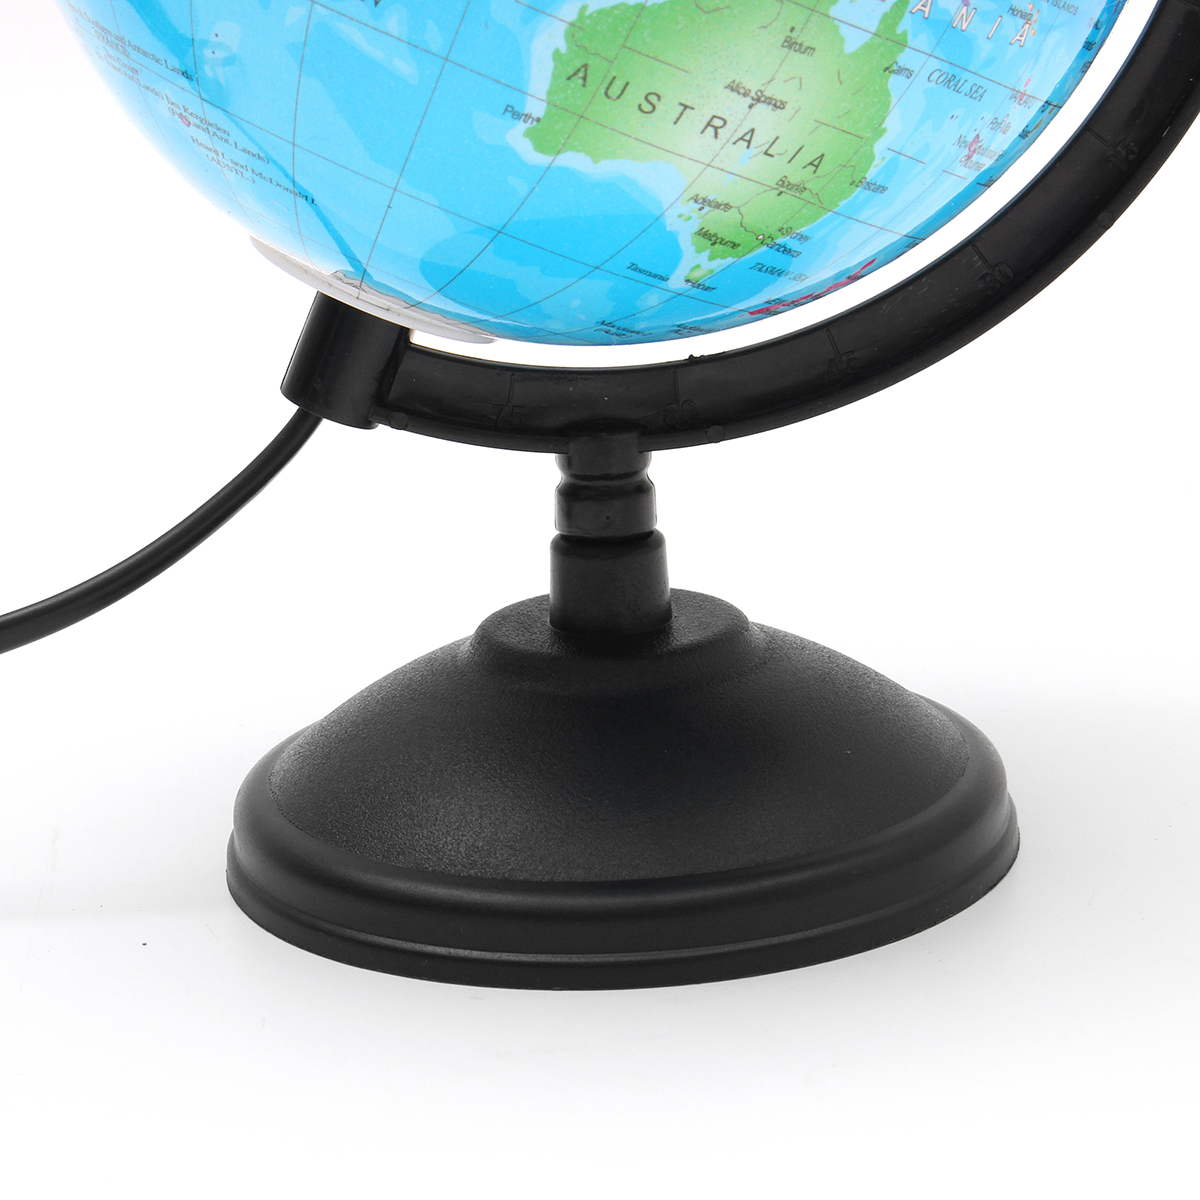 World-Earth-Globe-Atlas-Map-Geography-Education-Gift-w-Rotating-Stand-LED-light-1256065-6